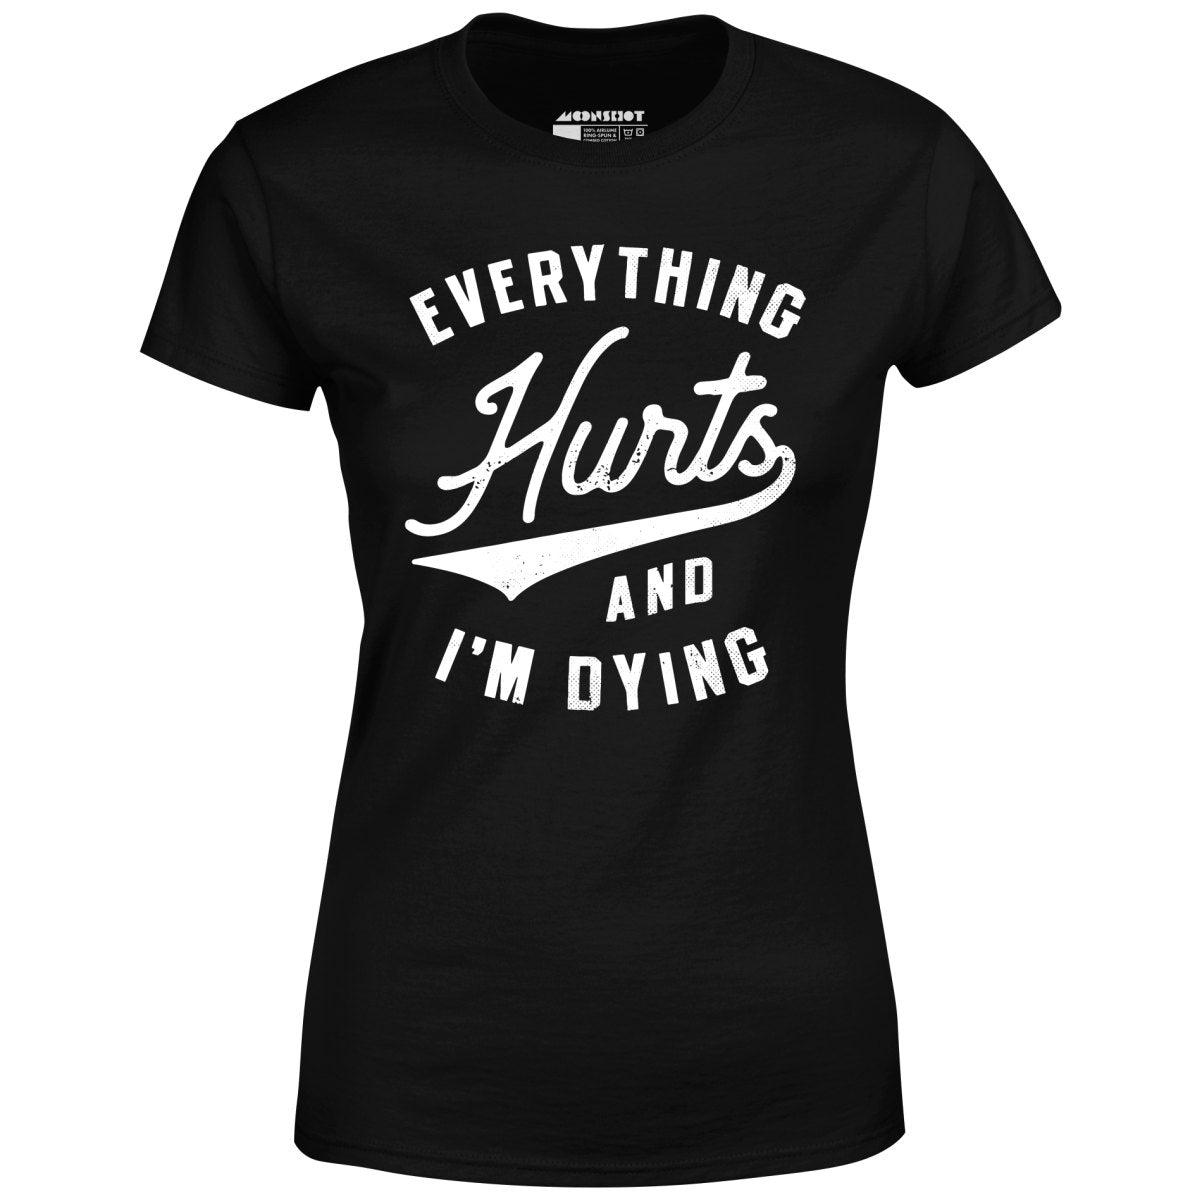 Everything Hurts and I'm Dying - Women's T-Shirt